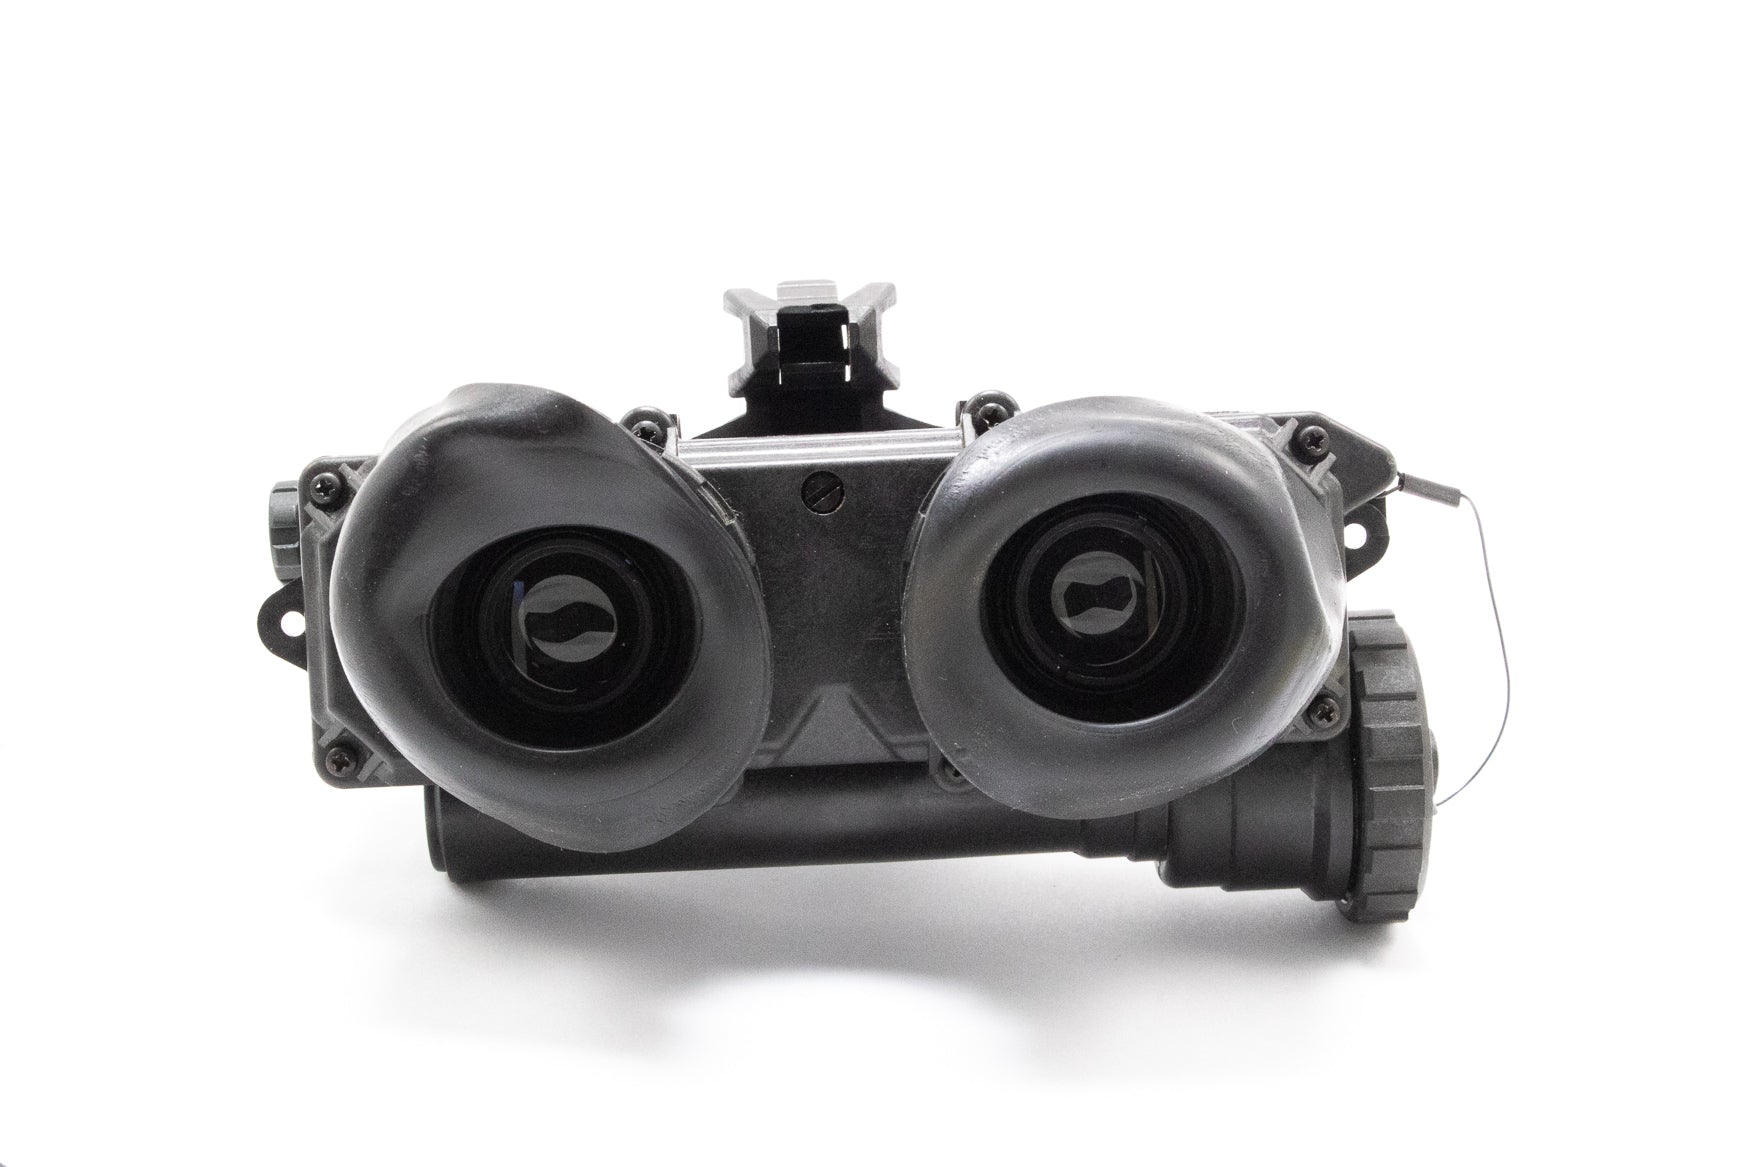 NightOps Tactical Ruggedized Night Vision Goggle (RNVG) – Night Ops Tactical